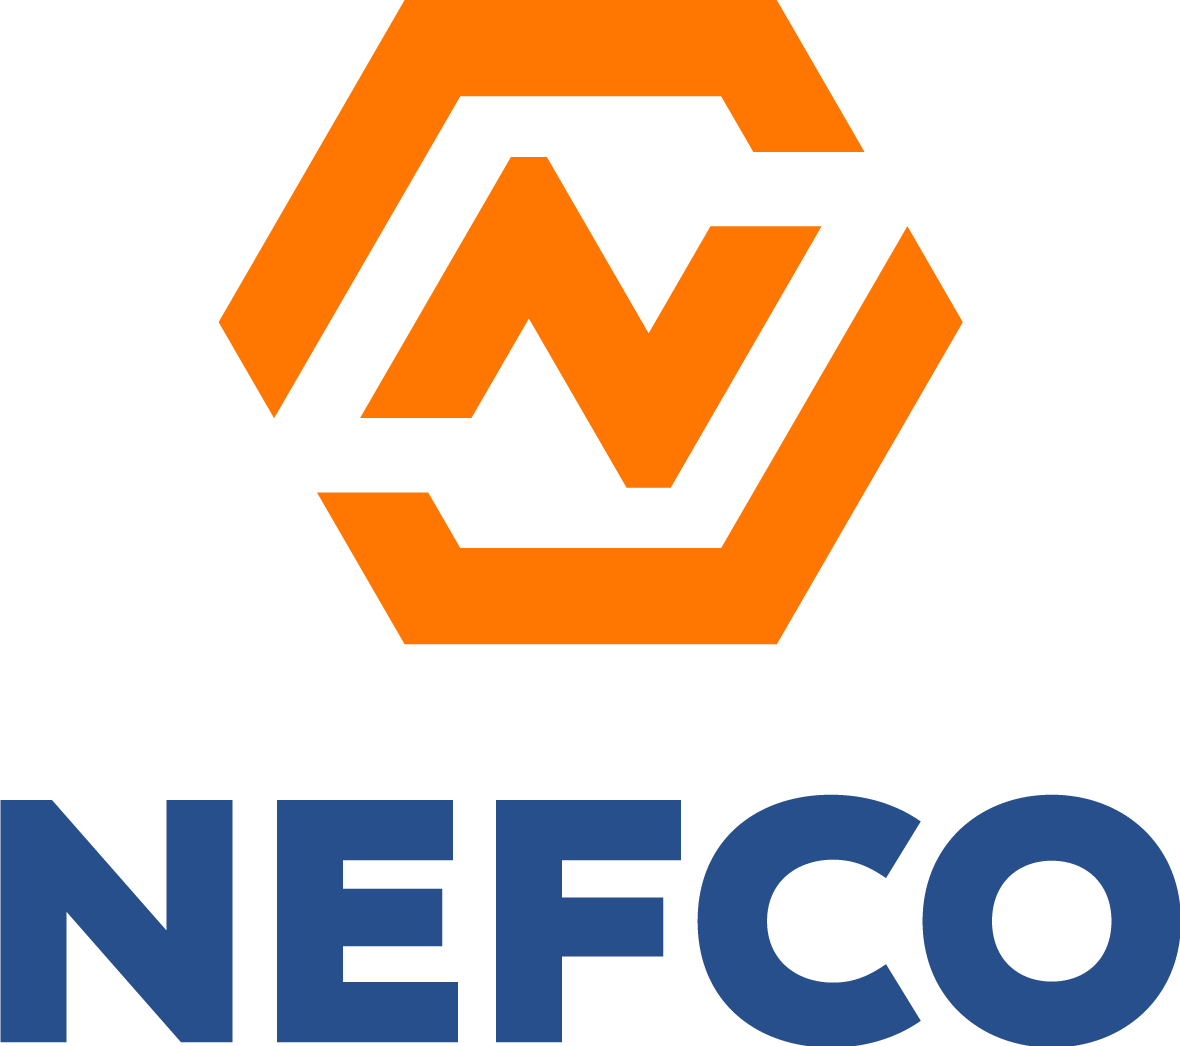 NEFCO Completes Acquisition of Edge Construction Supply